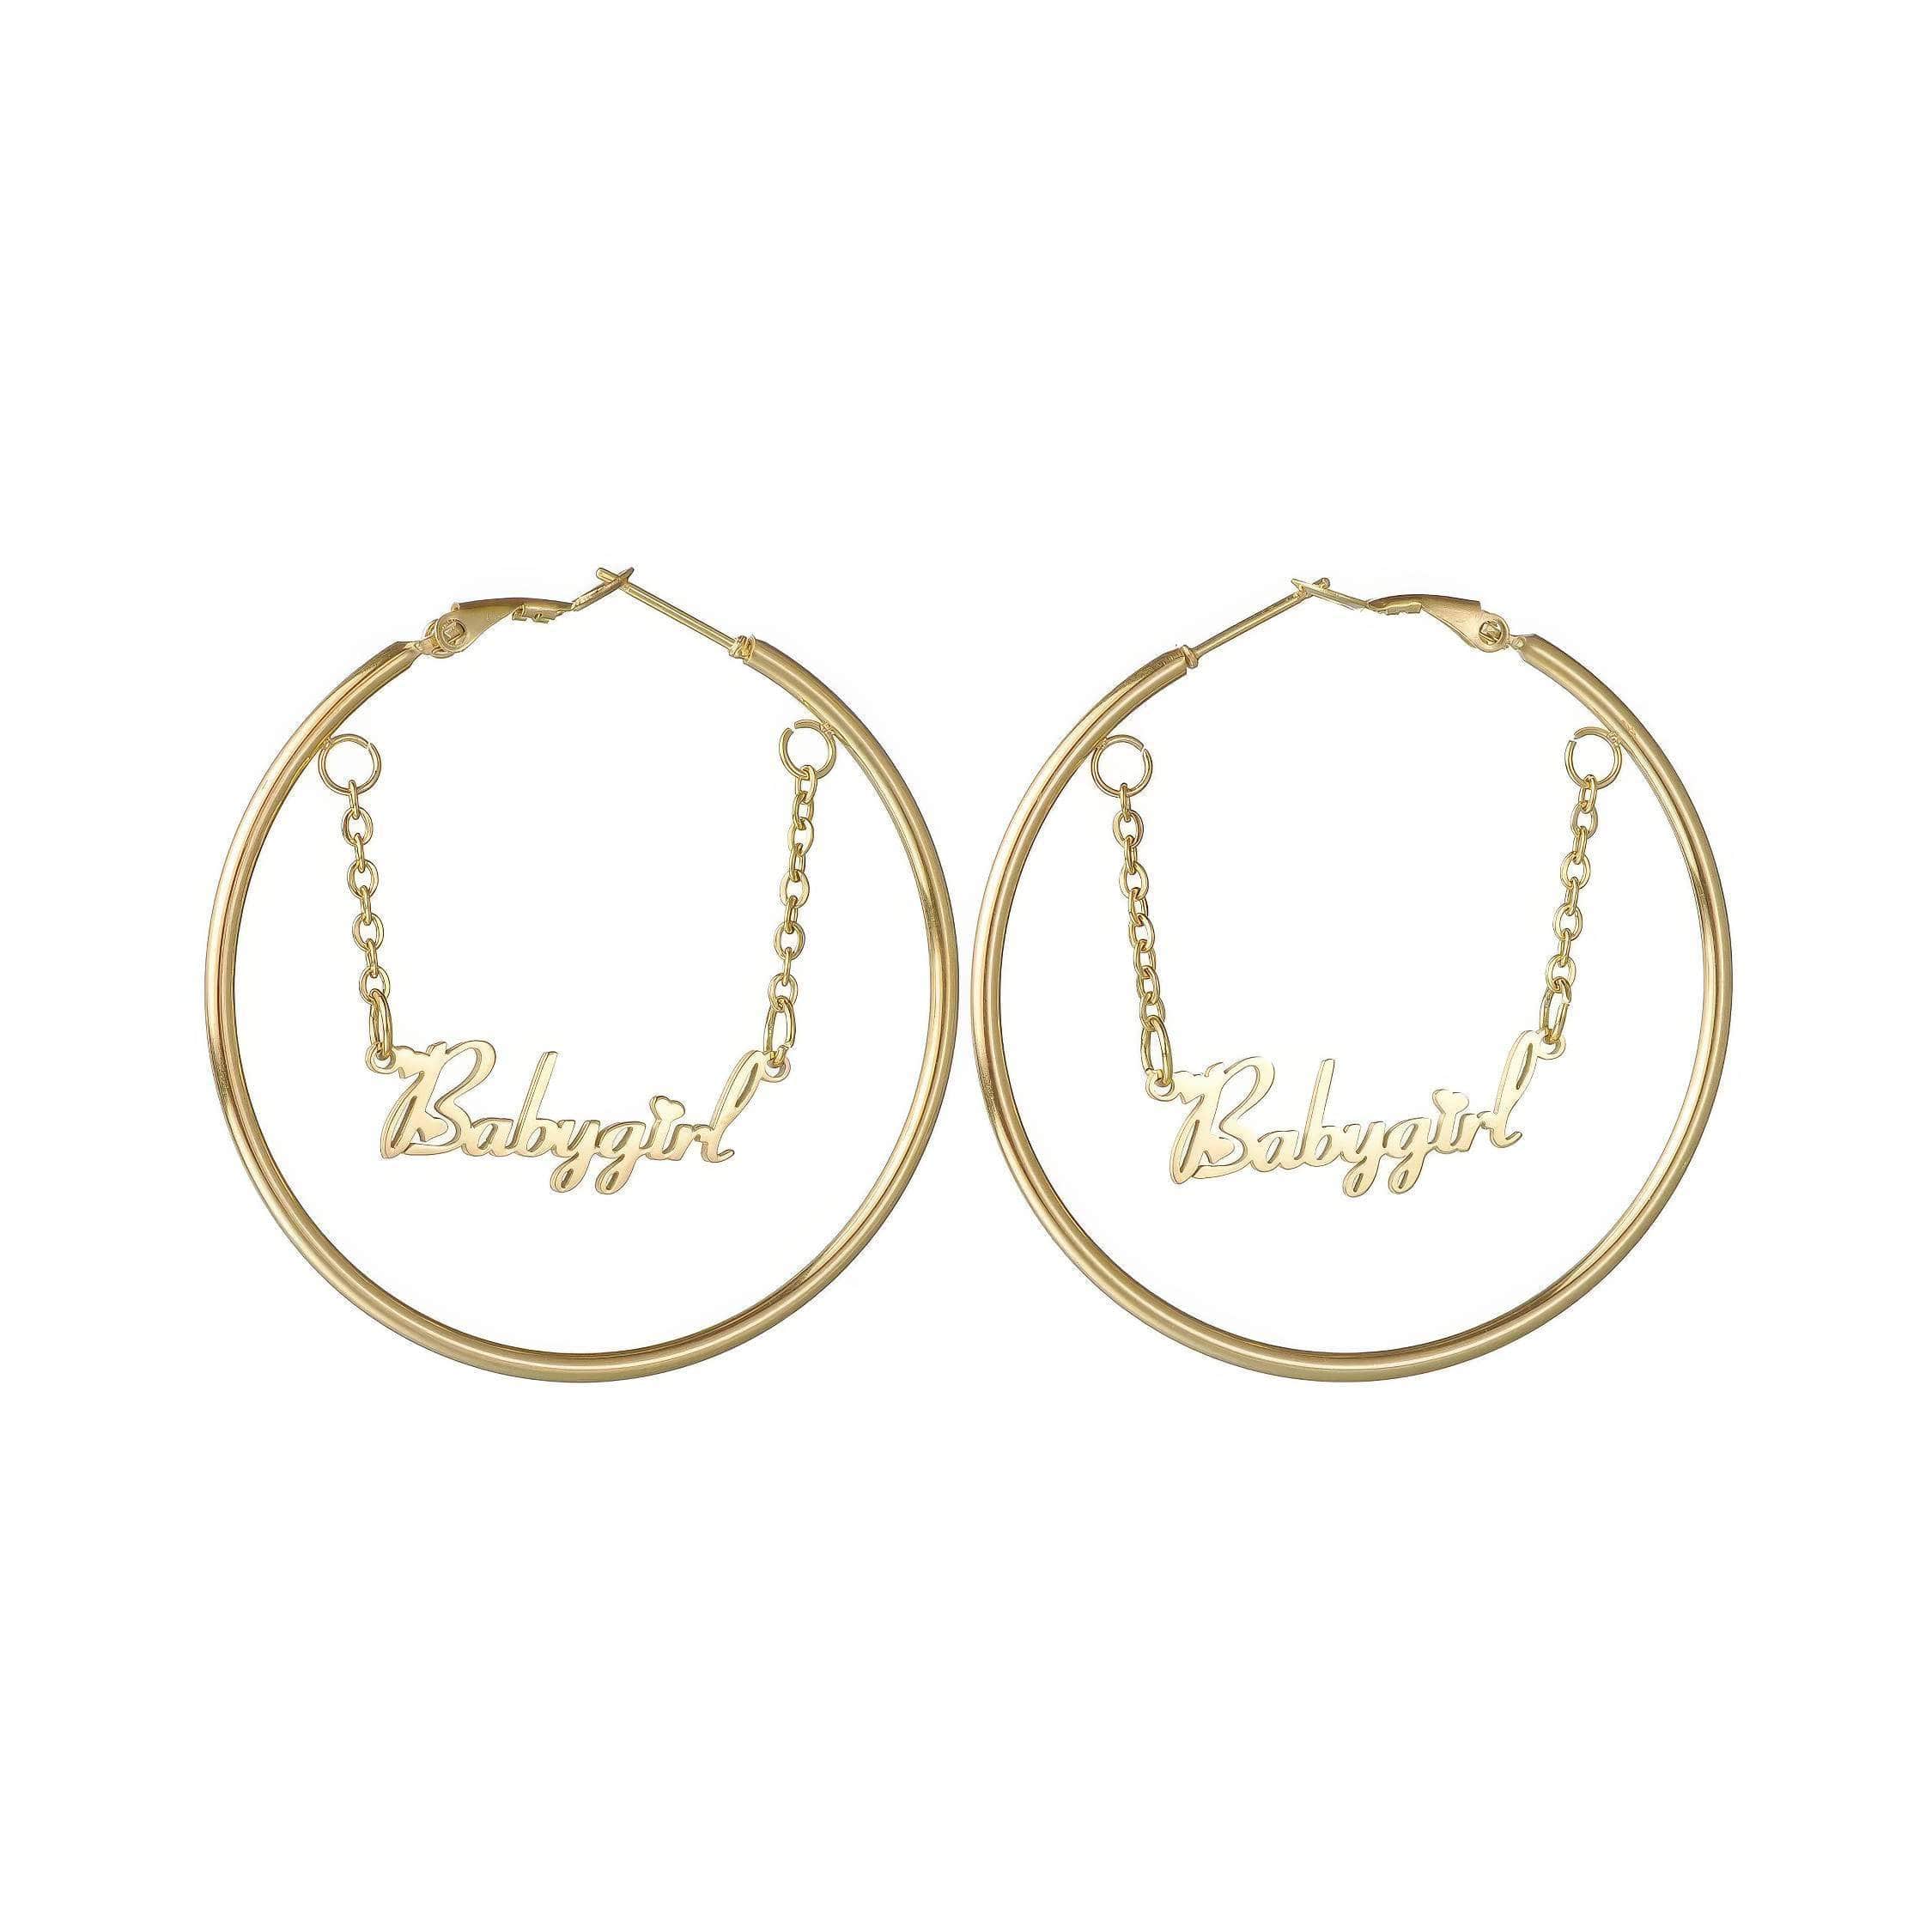 Personalized Custom Name Earrings with Chain - Stainless Steel for Women, featuring Letters Nameplate for a fashionable Birthday Jewelry Gift